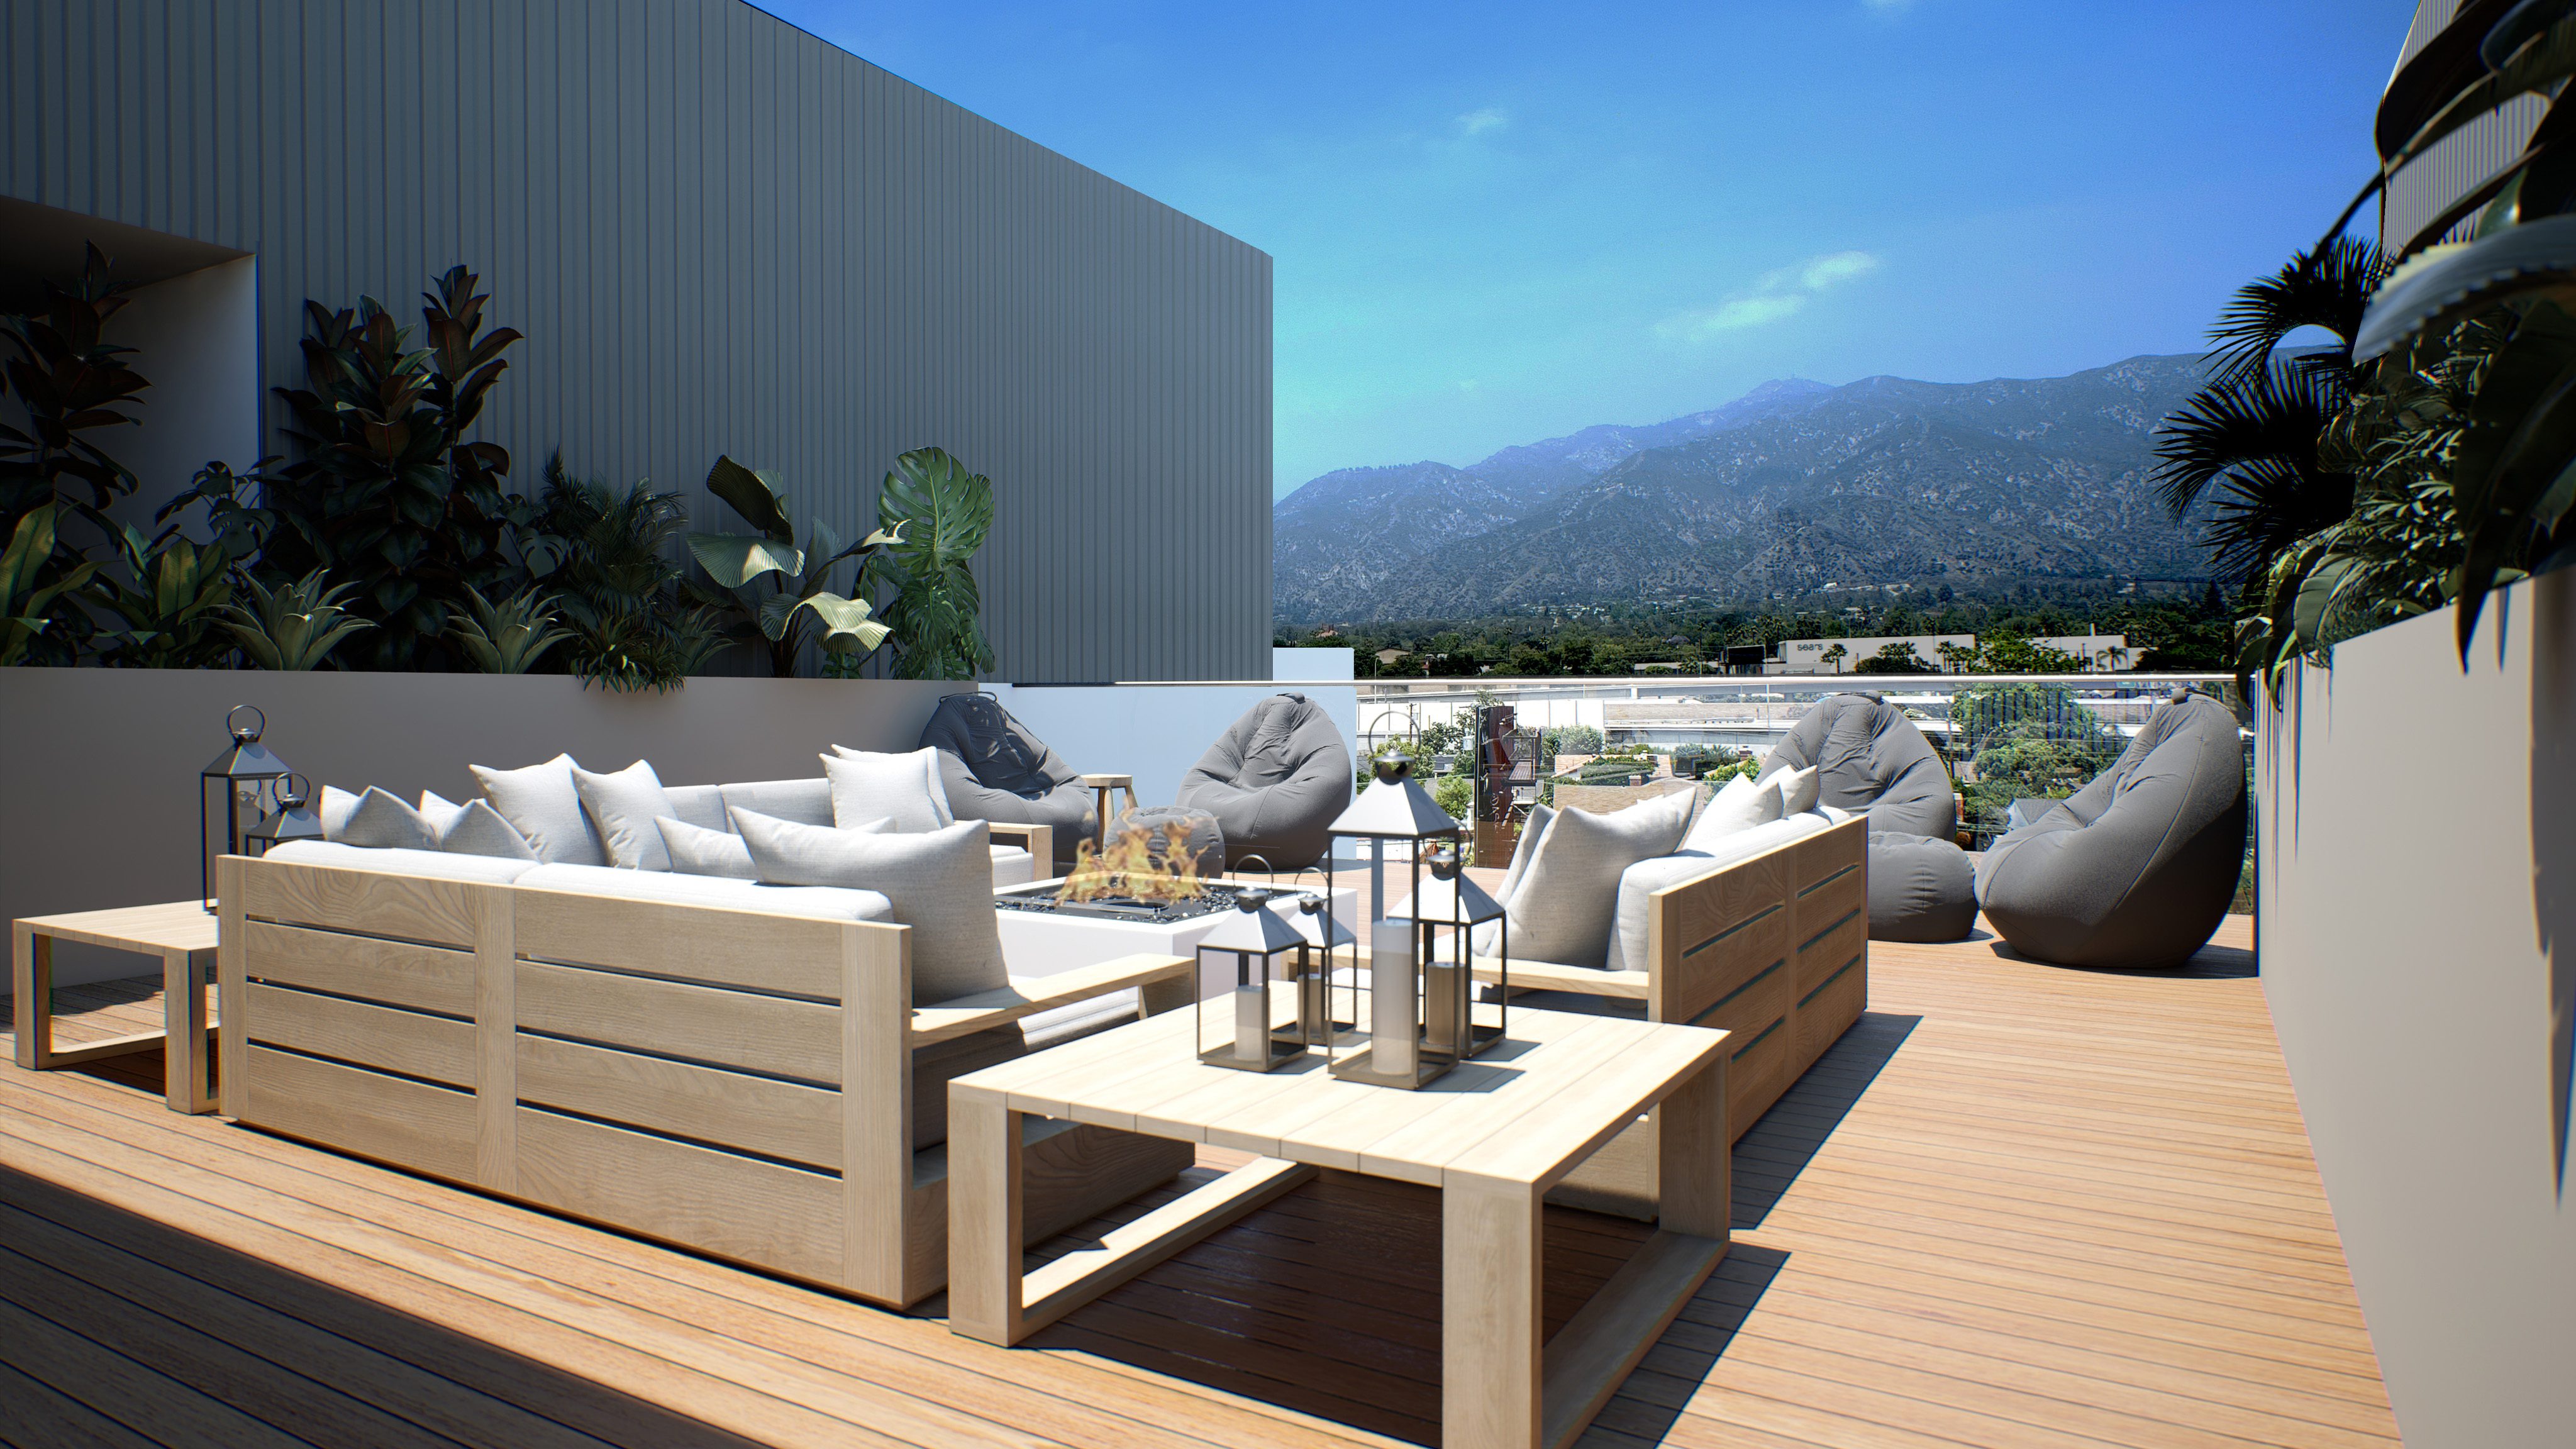 Patio with cream wooden couches, fire pit, dark gray bean bag seating, greenery and view of Pasadena hills